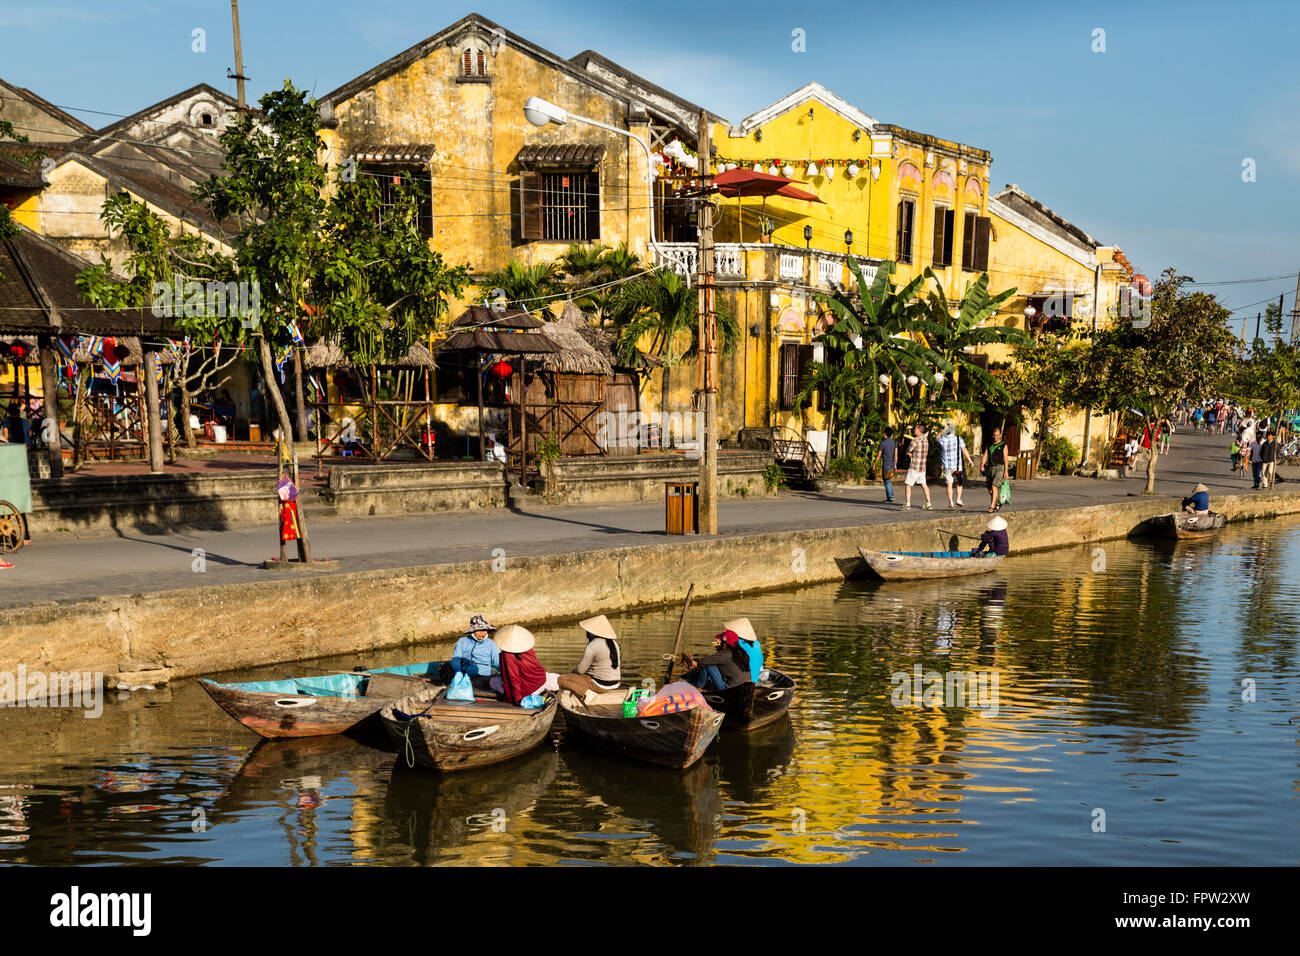 Colonial Architecture, Old Town of Hoi An, Vietnam Stock Photo